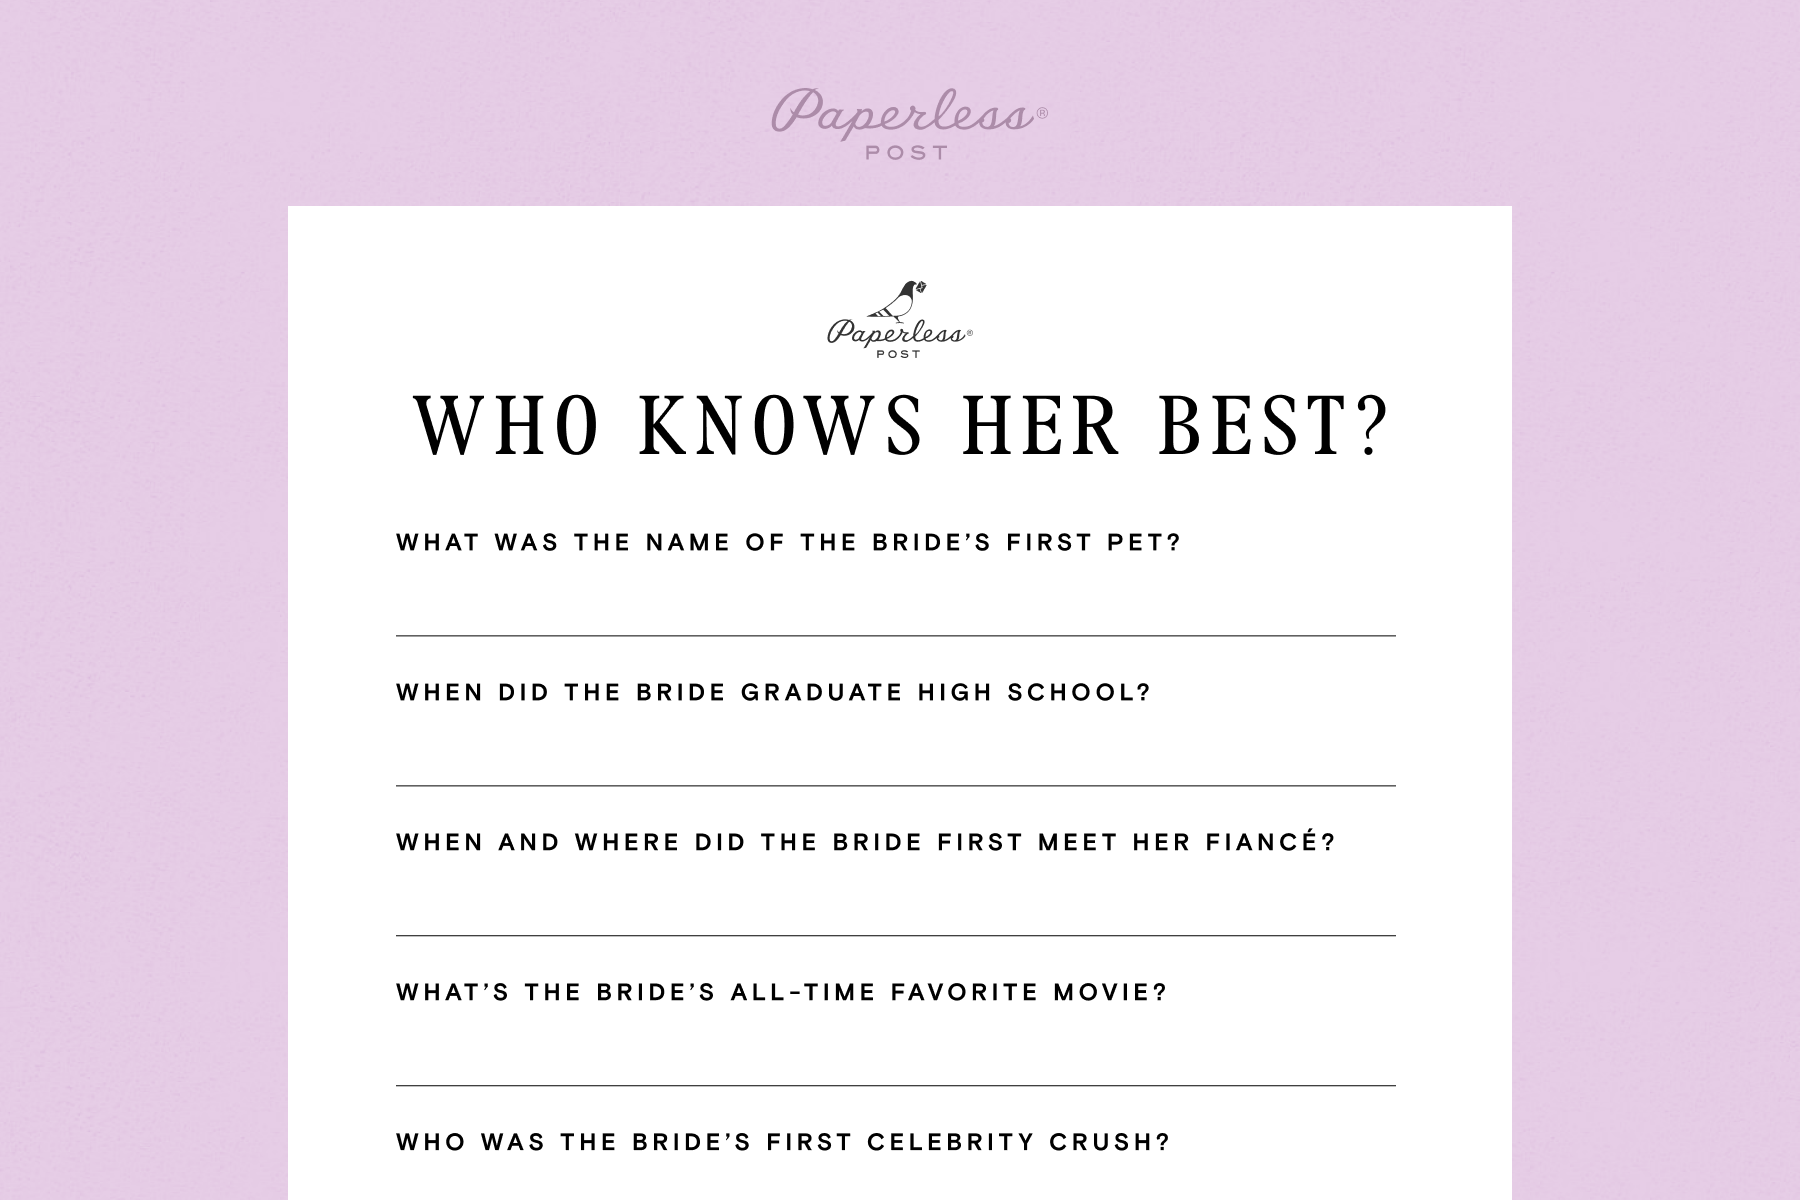 A partial view of a print-out sheet for a trivia game called WHO KNOWS HER BEST?